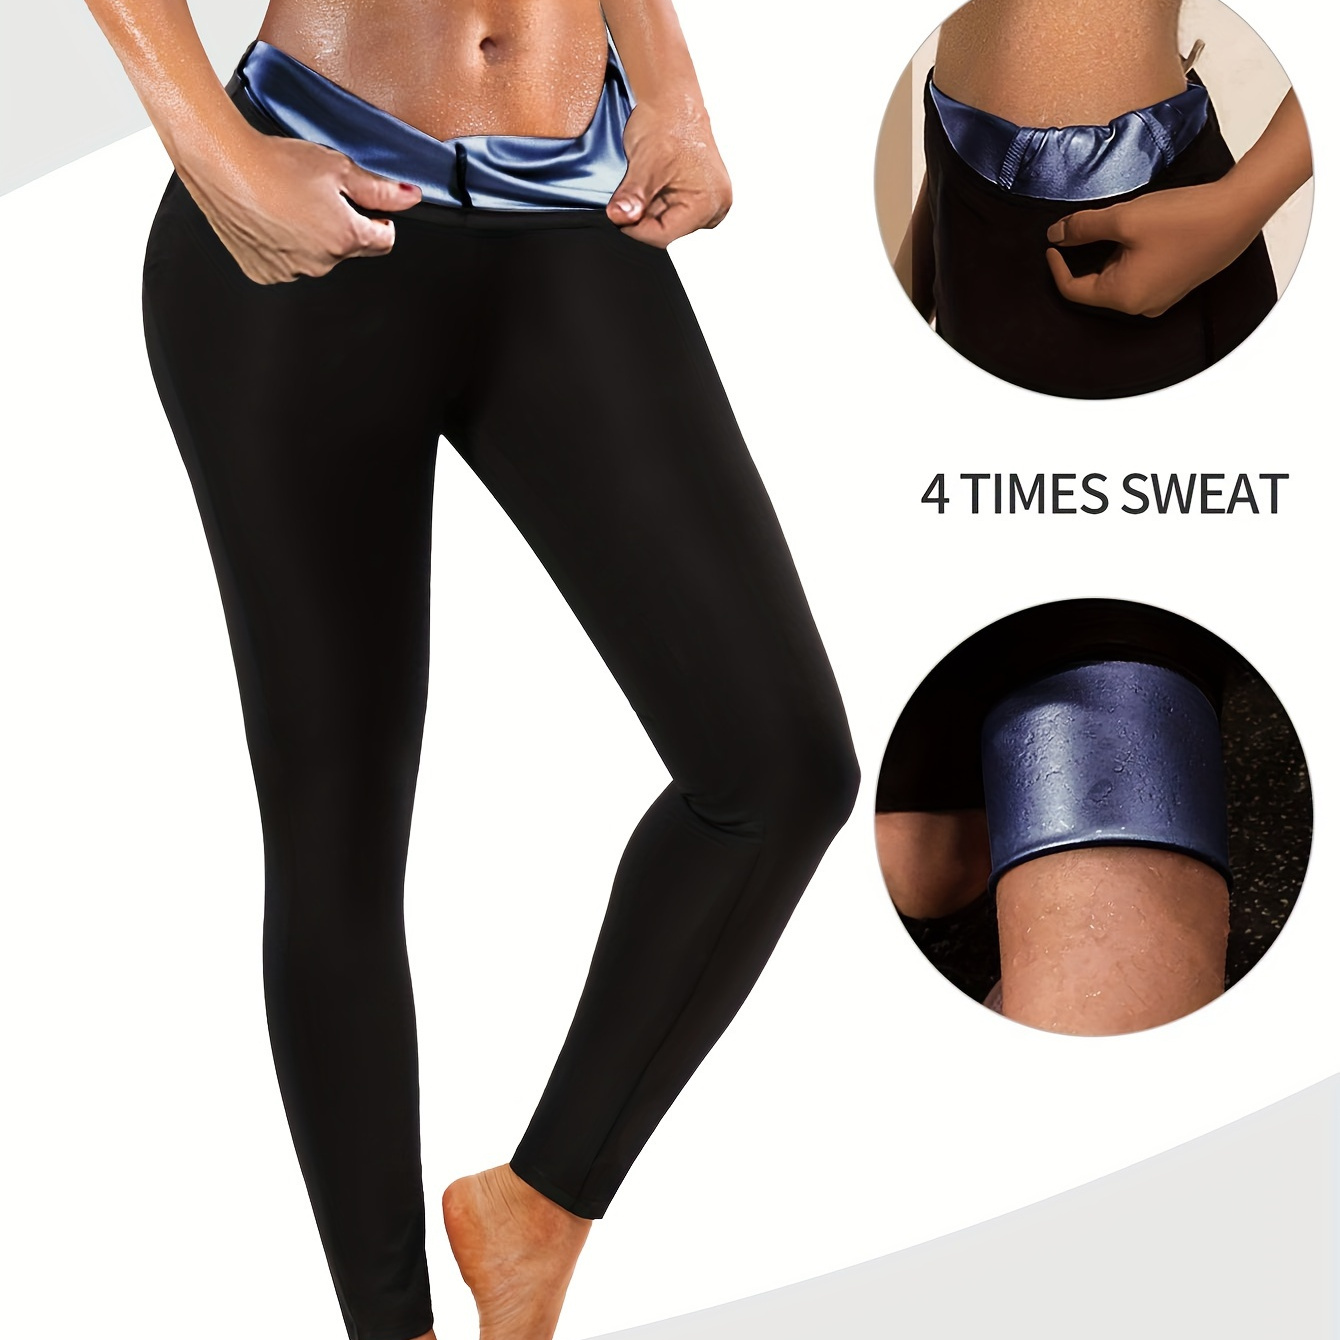 

Women's Sweat Sauna Pants, Athletic Full-season Workout Yoga Fitness Leggings, Heat Retention Increase Sweating Waist And Thigh Shaper, Water-resistant And Windproof Material For Fall & Winter